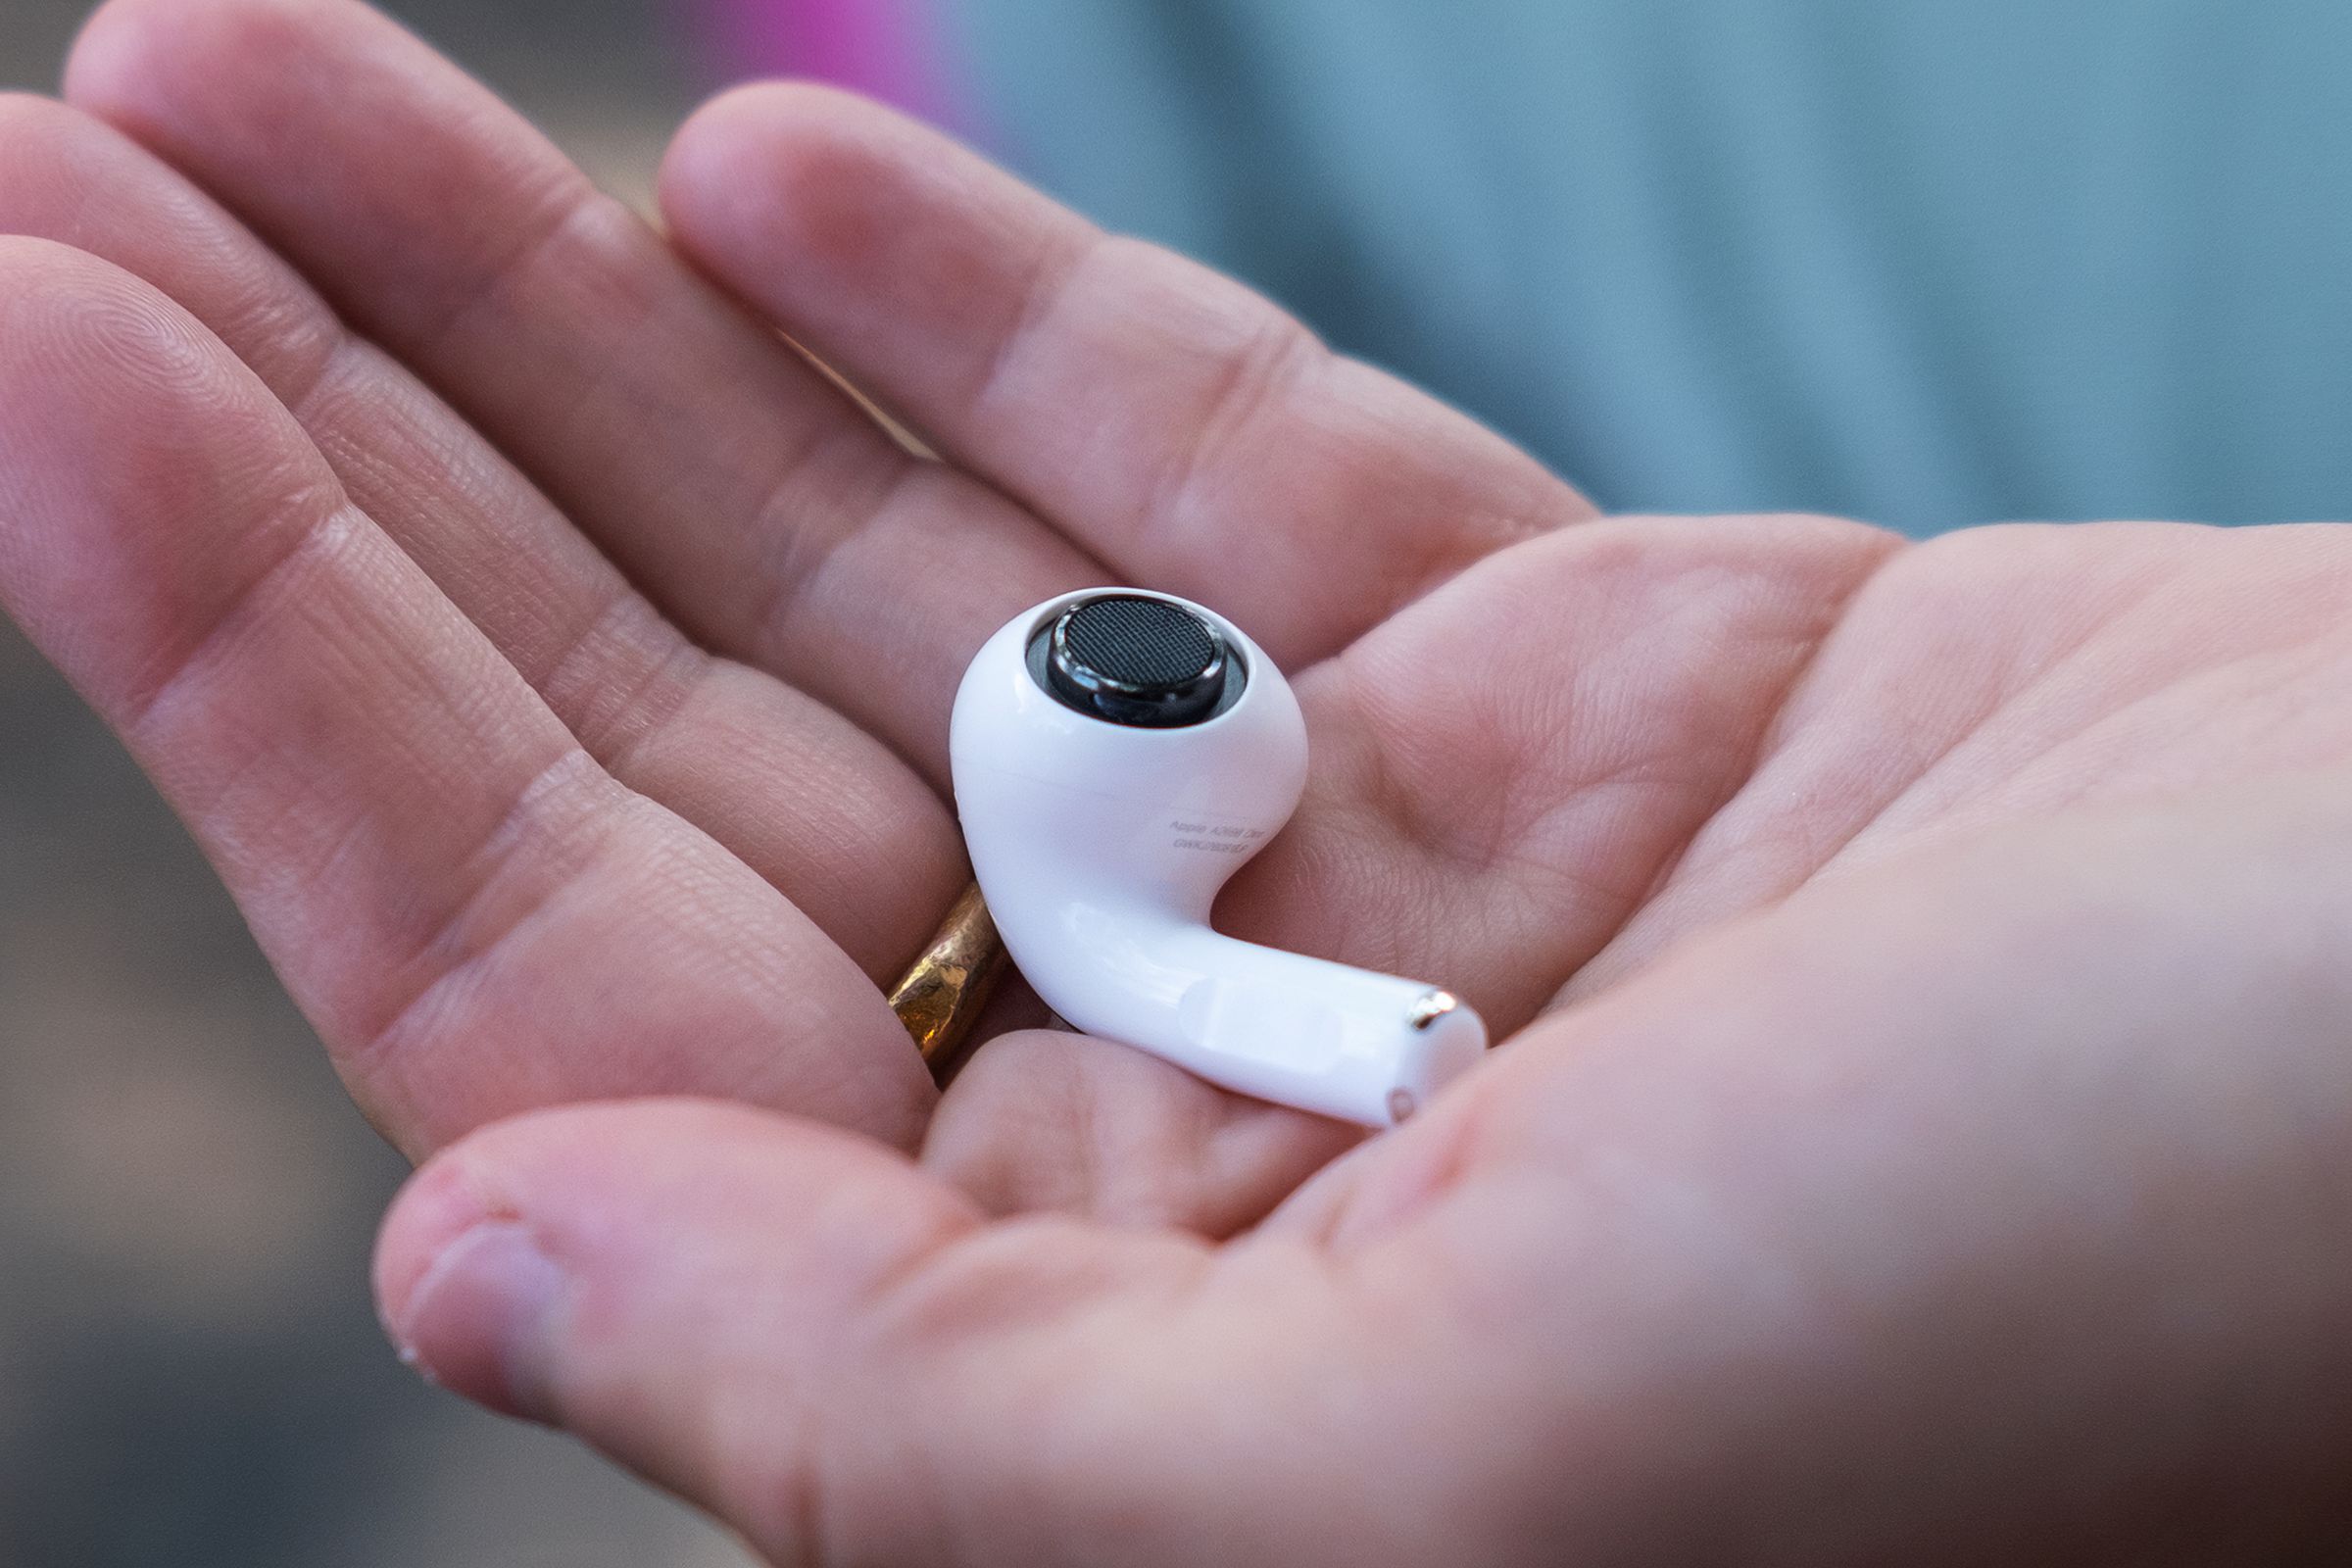 One of Apple’s second-generation AirPods Pro pictured in a person’s hand with the ear tip detached.